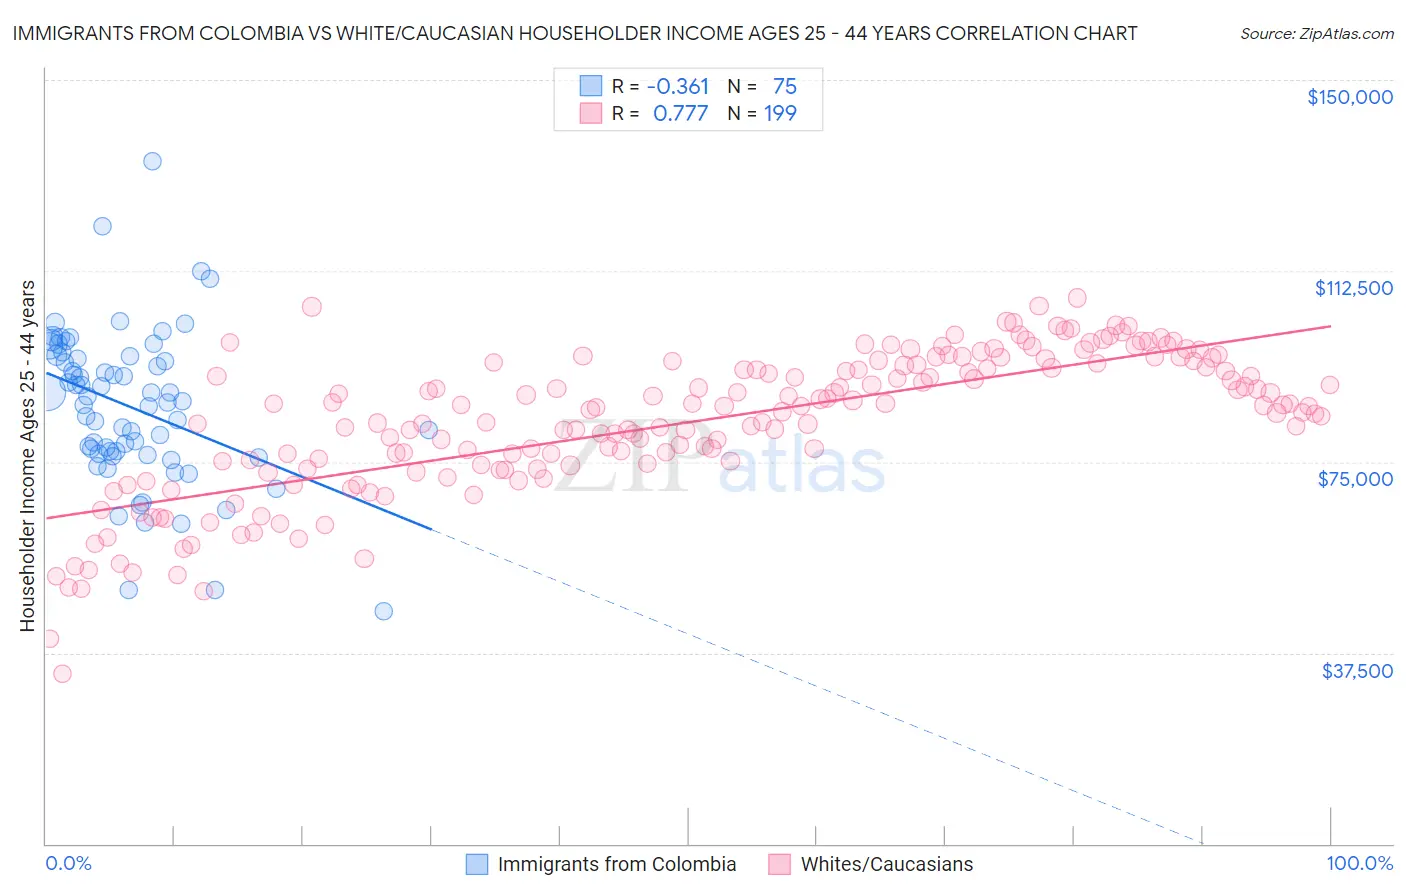 Immigrants from Colombia vs White/Caucasian Householder Income Ages 25 - 44 years